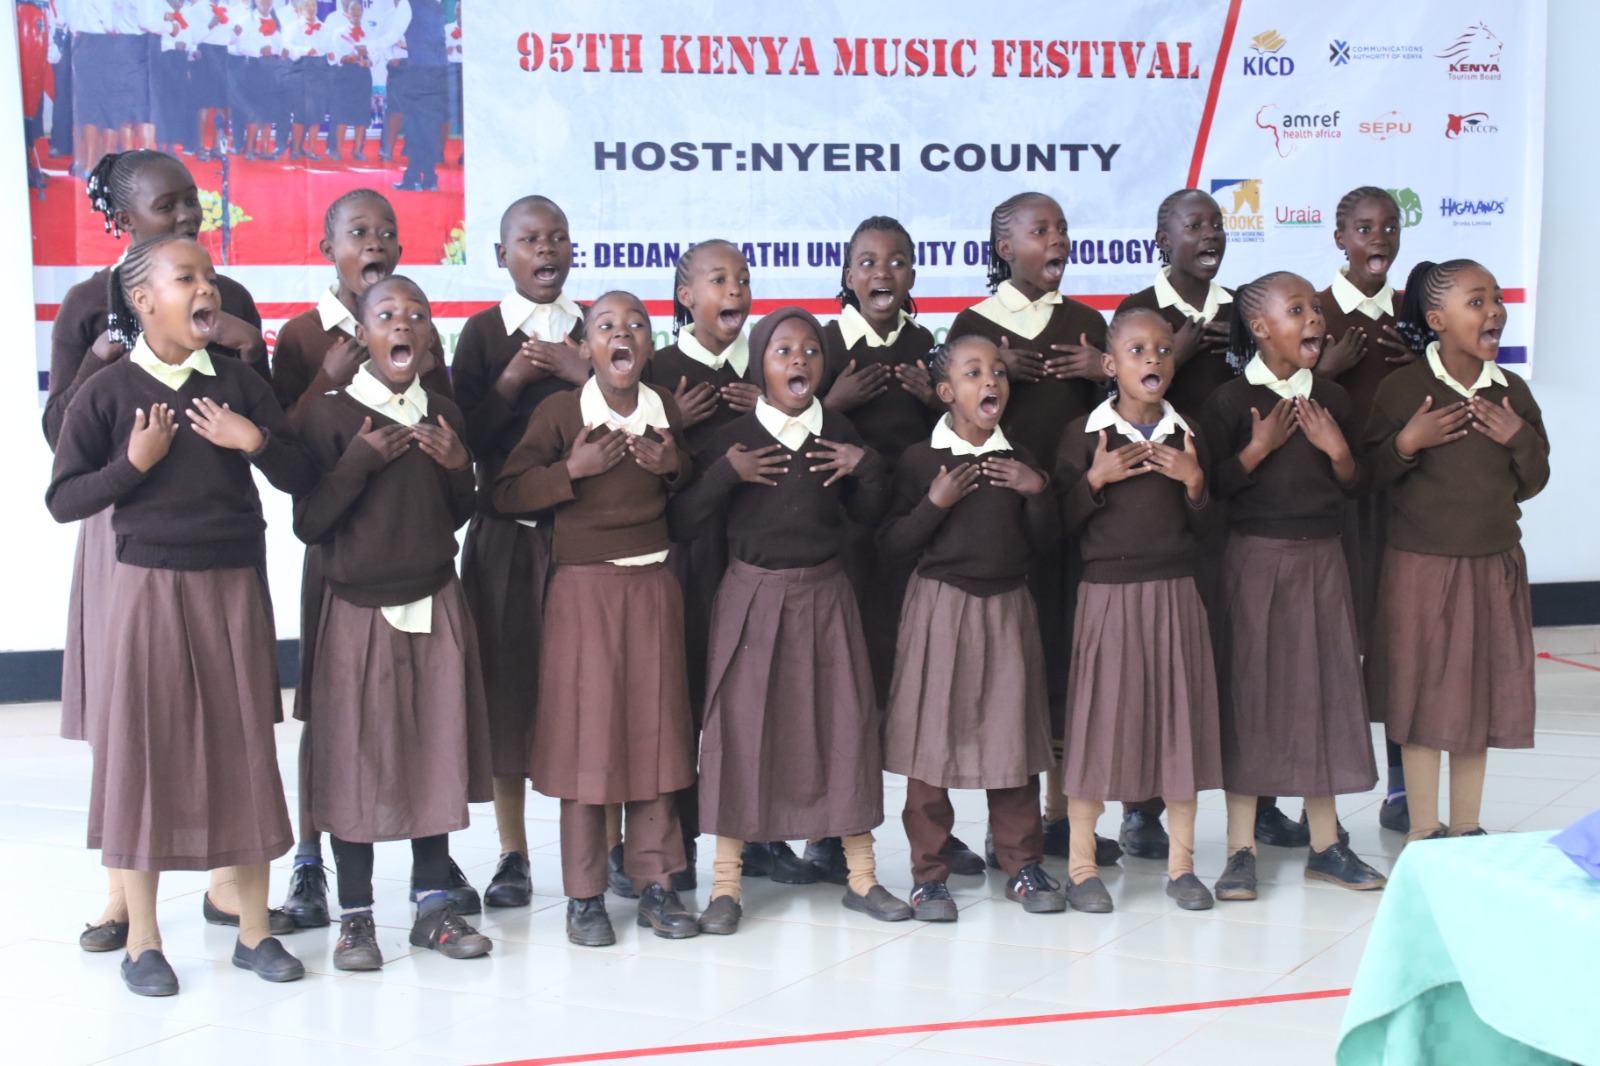 The Communications Authority has partnered with The Ministry Of Education to champion for safe use of internet in the ongoing national music festivals.